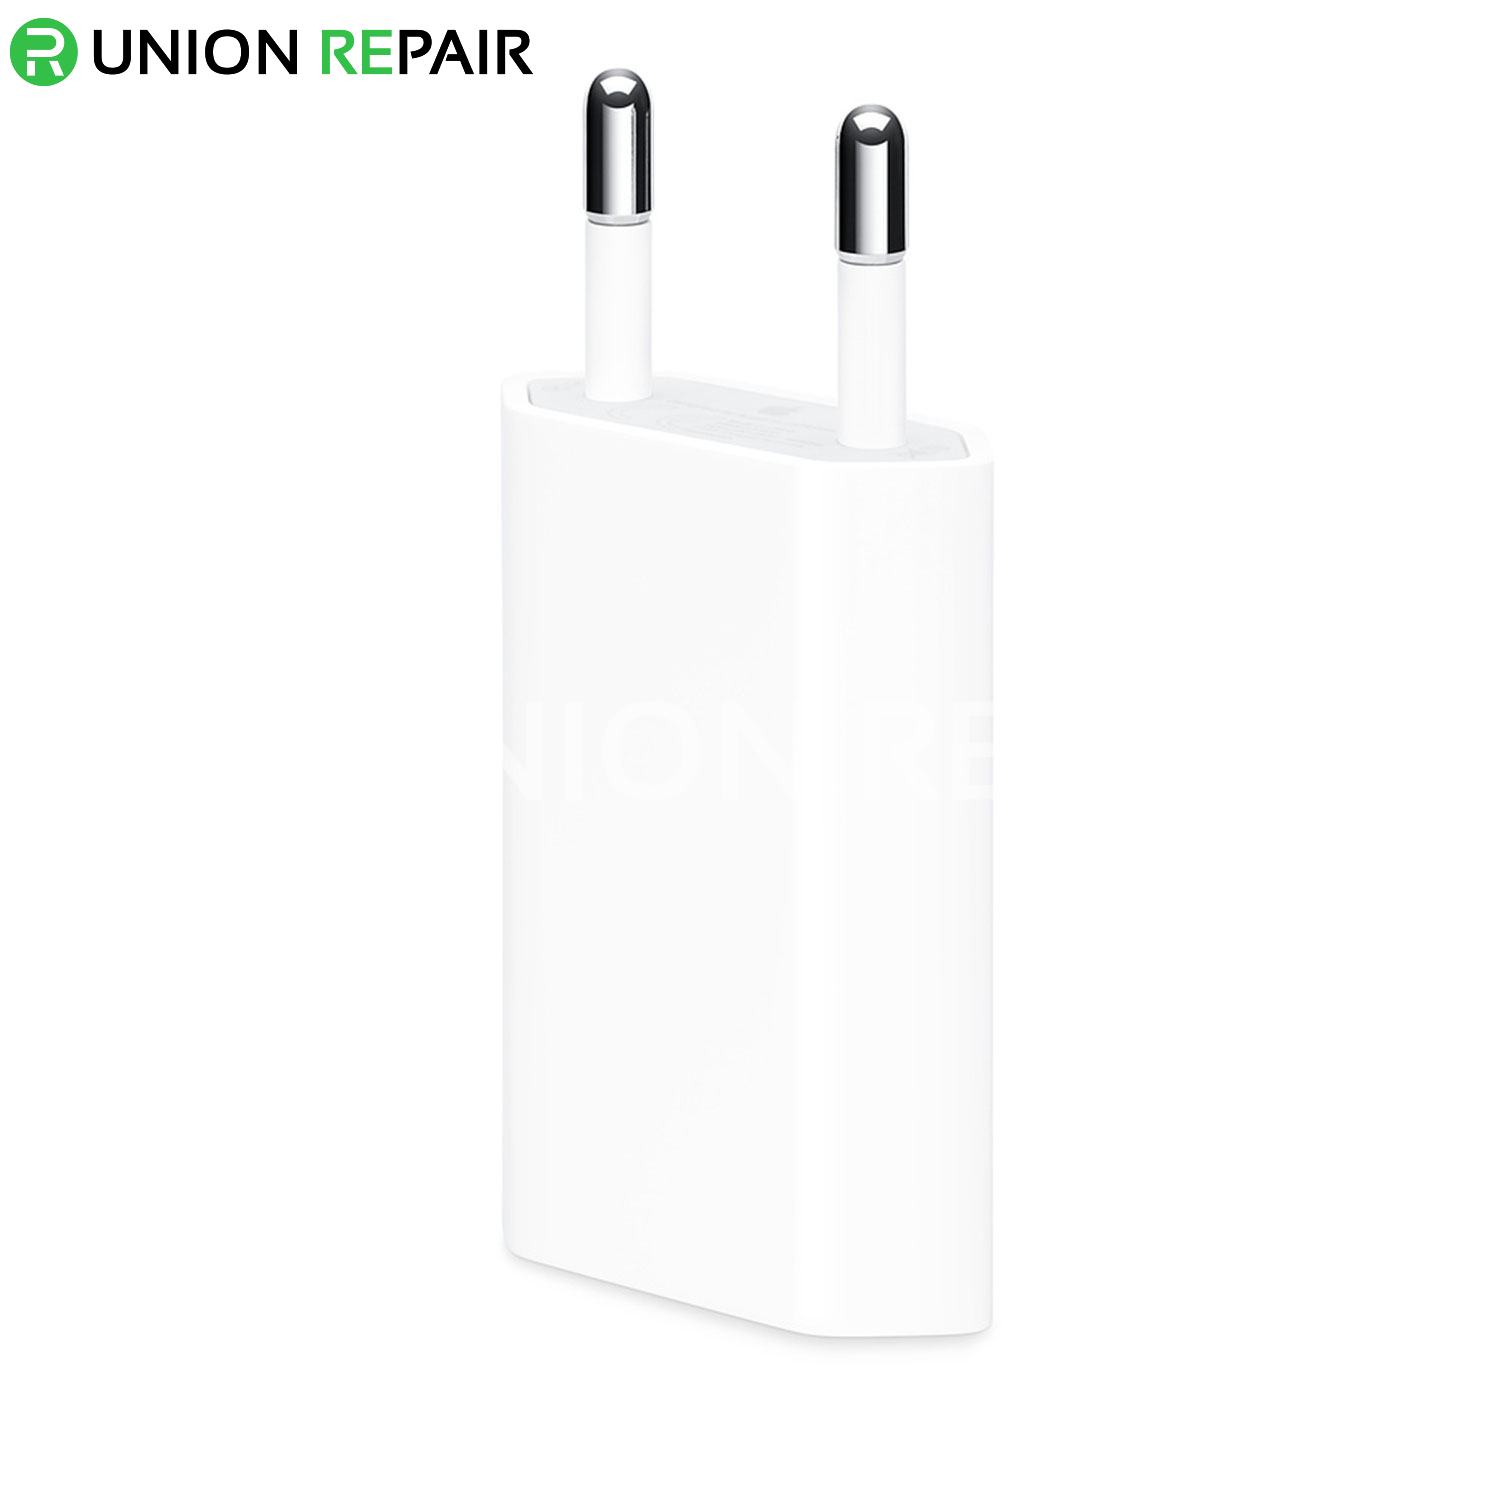 For iPhone 5W USB Power Adapter - EU Version